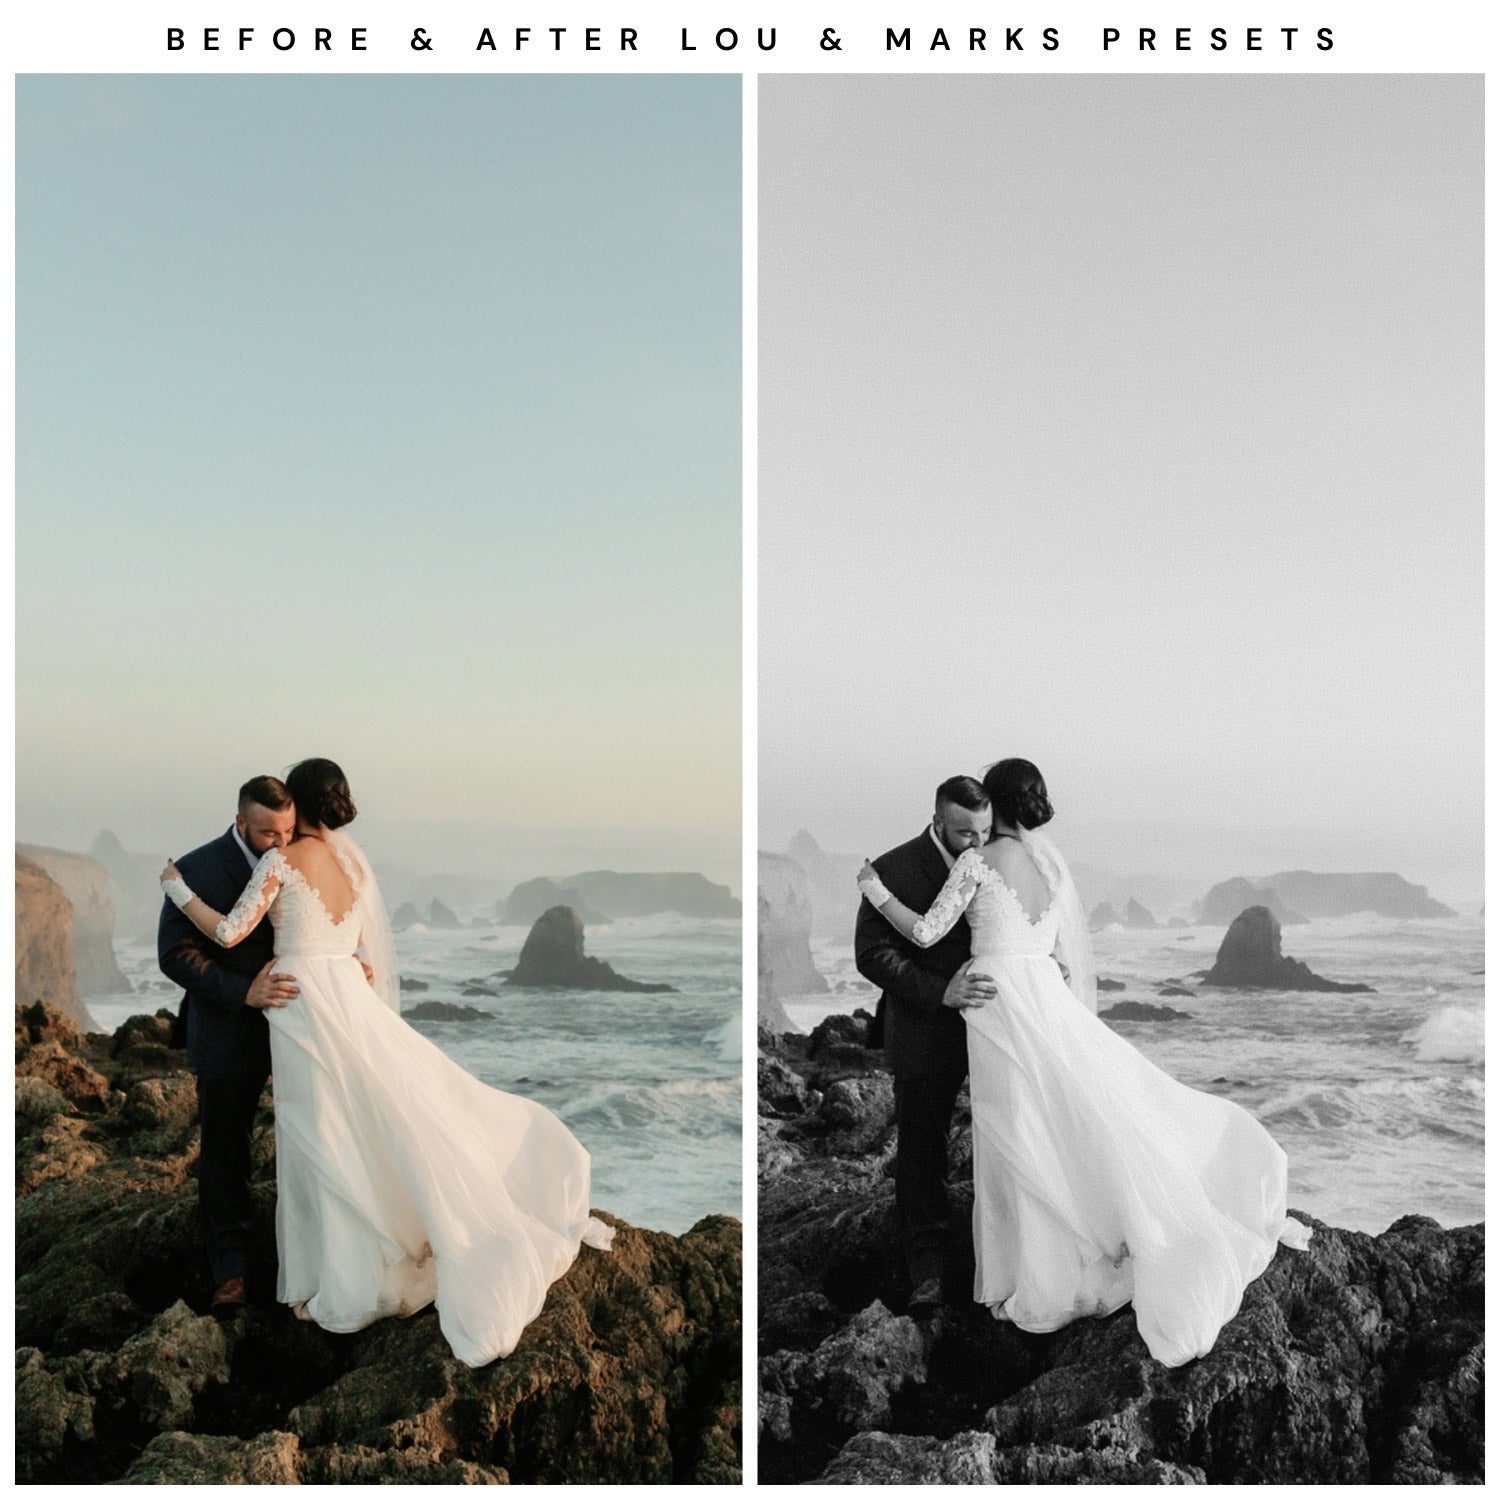 Lou And Marks Presets Moody Lightroom Presets Bundle The Best Moody Presets Wedding